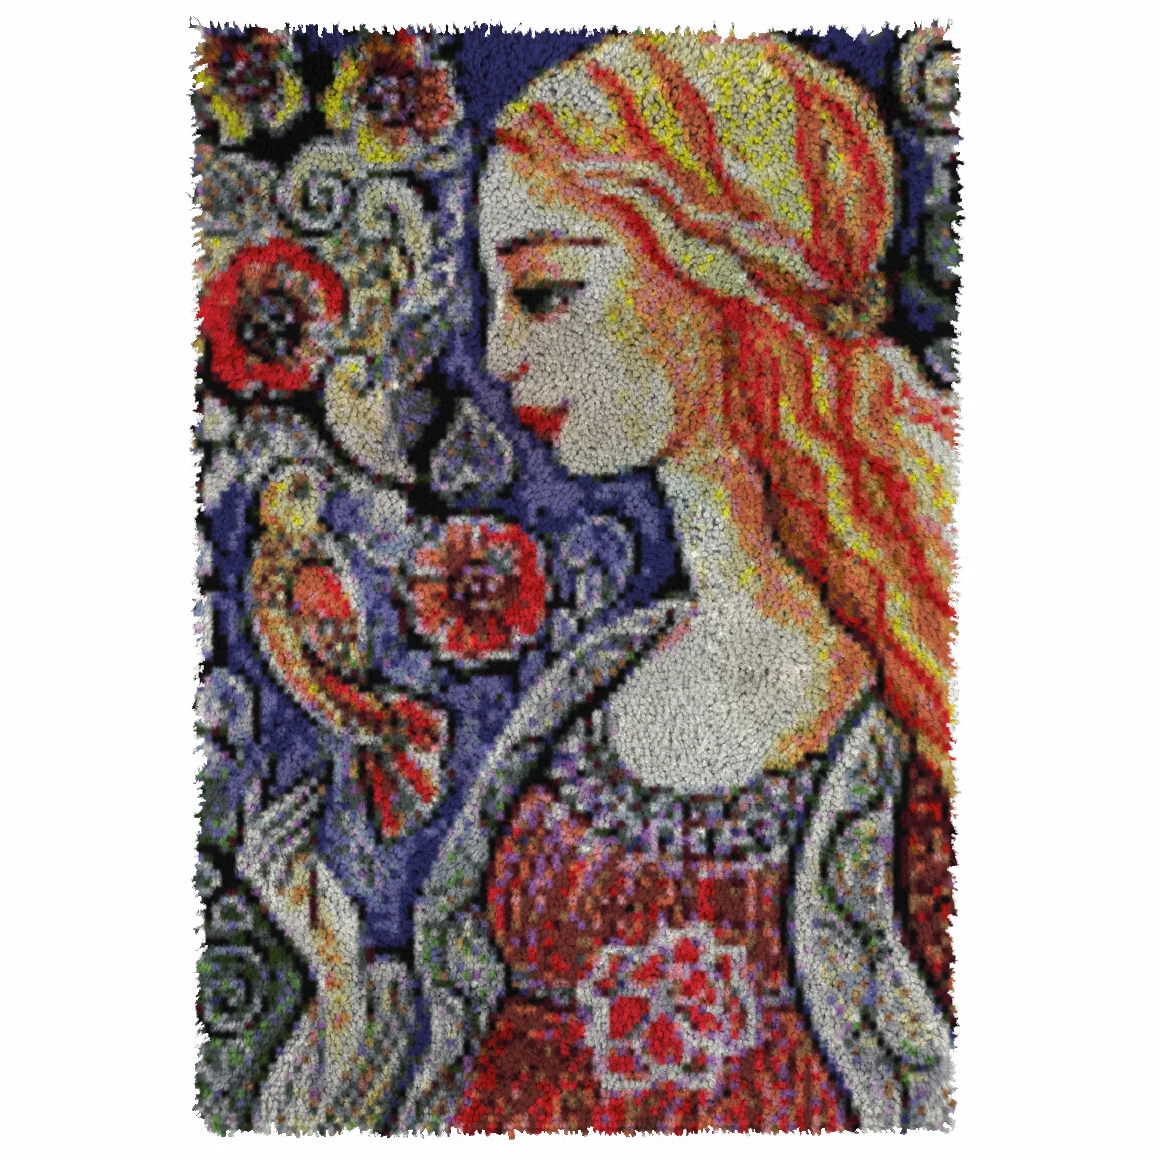 

Latch Hook Rug Kits Flower Girl Unfinished Crocheting Tapestry 3D Yarn Needlework Cushion Sets for Embroidery